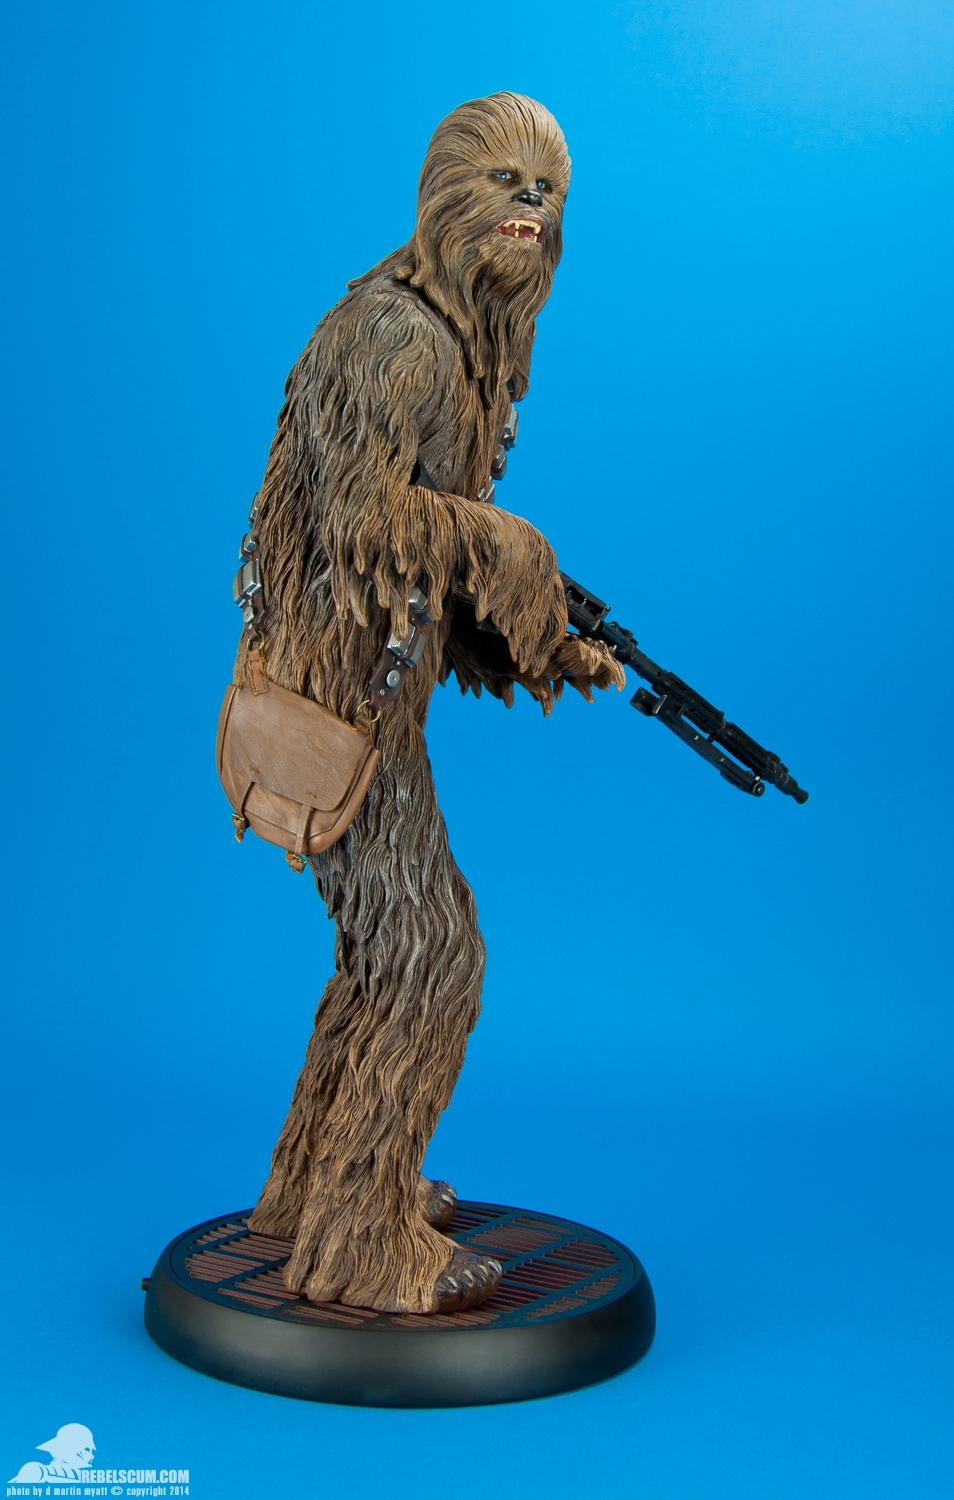 Chewbacca-Premium-Format-Figure-Sideshow-Collectibles-Exclusive-006.jpg